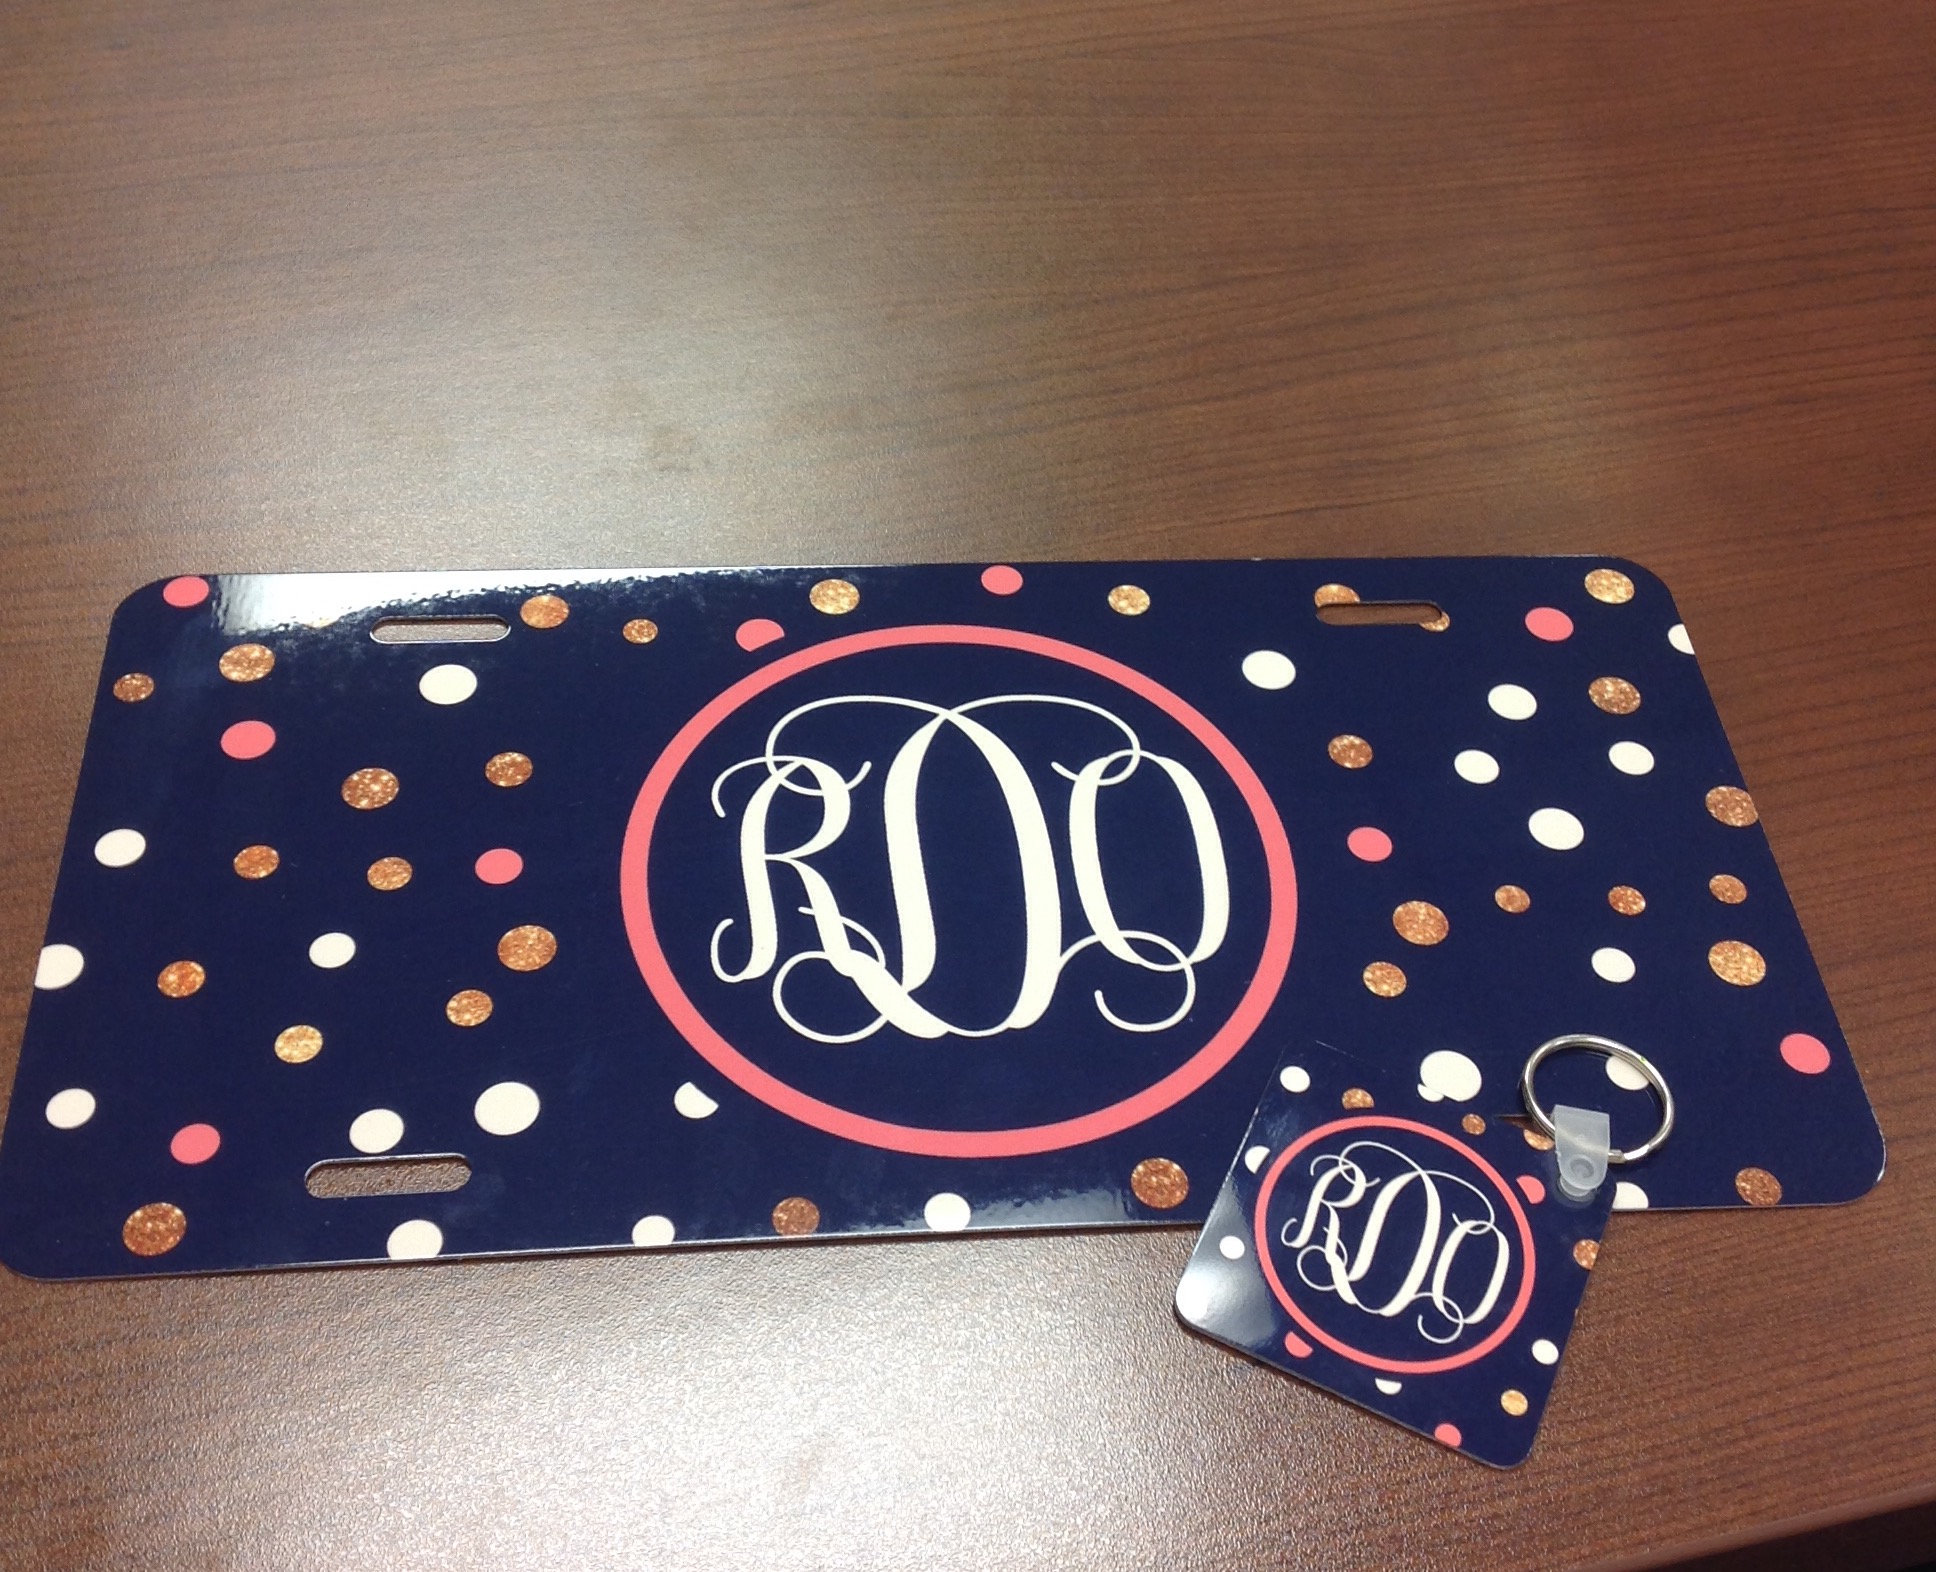 License Plate and Key Chain made with sublimation printing